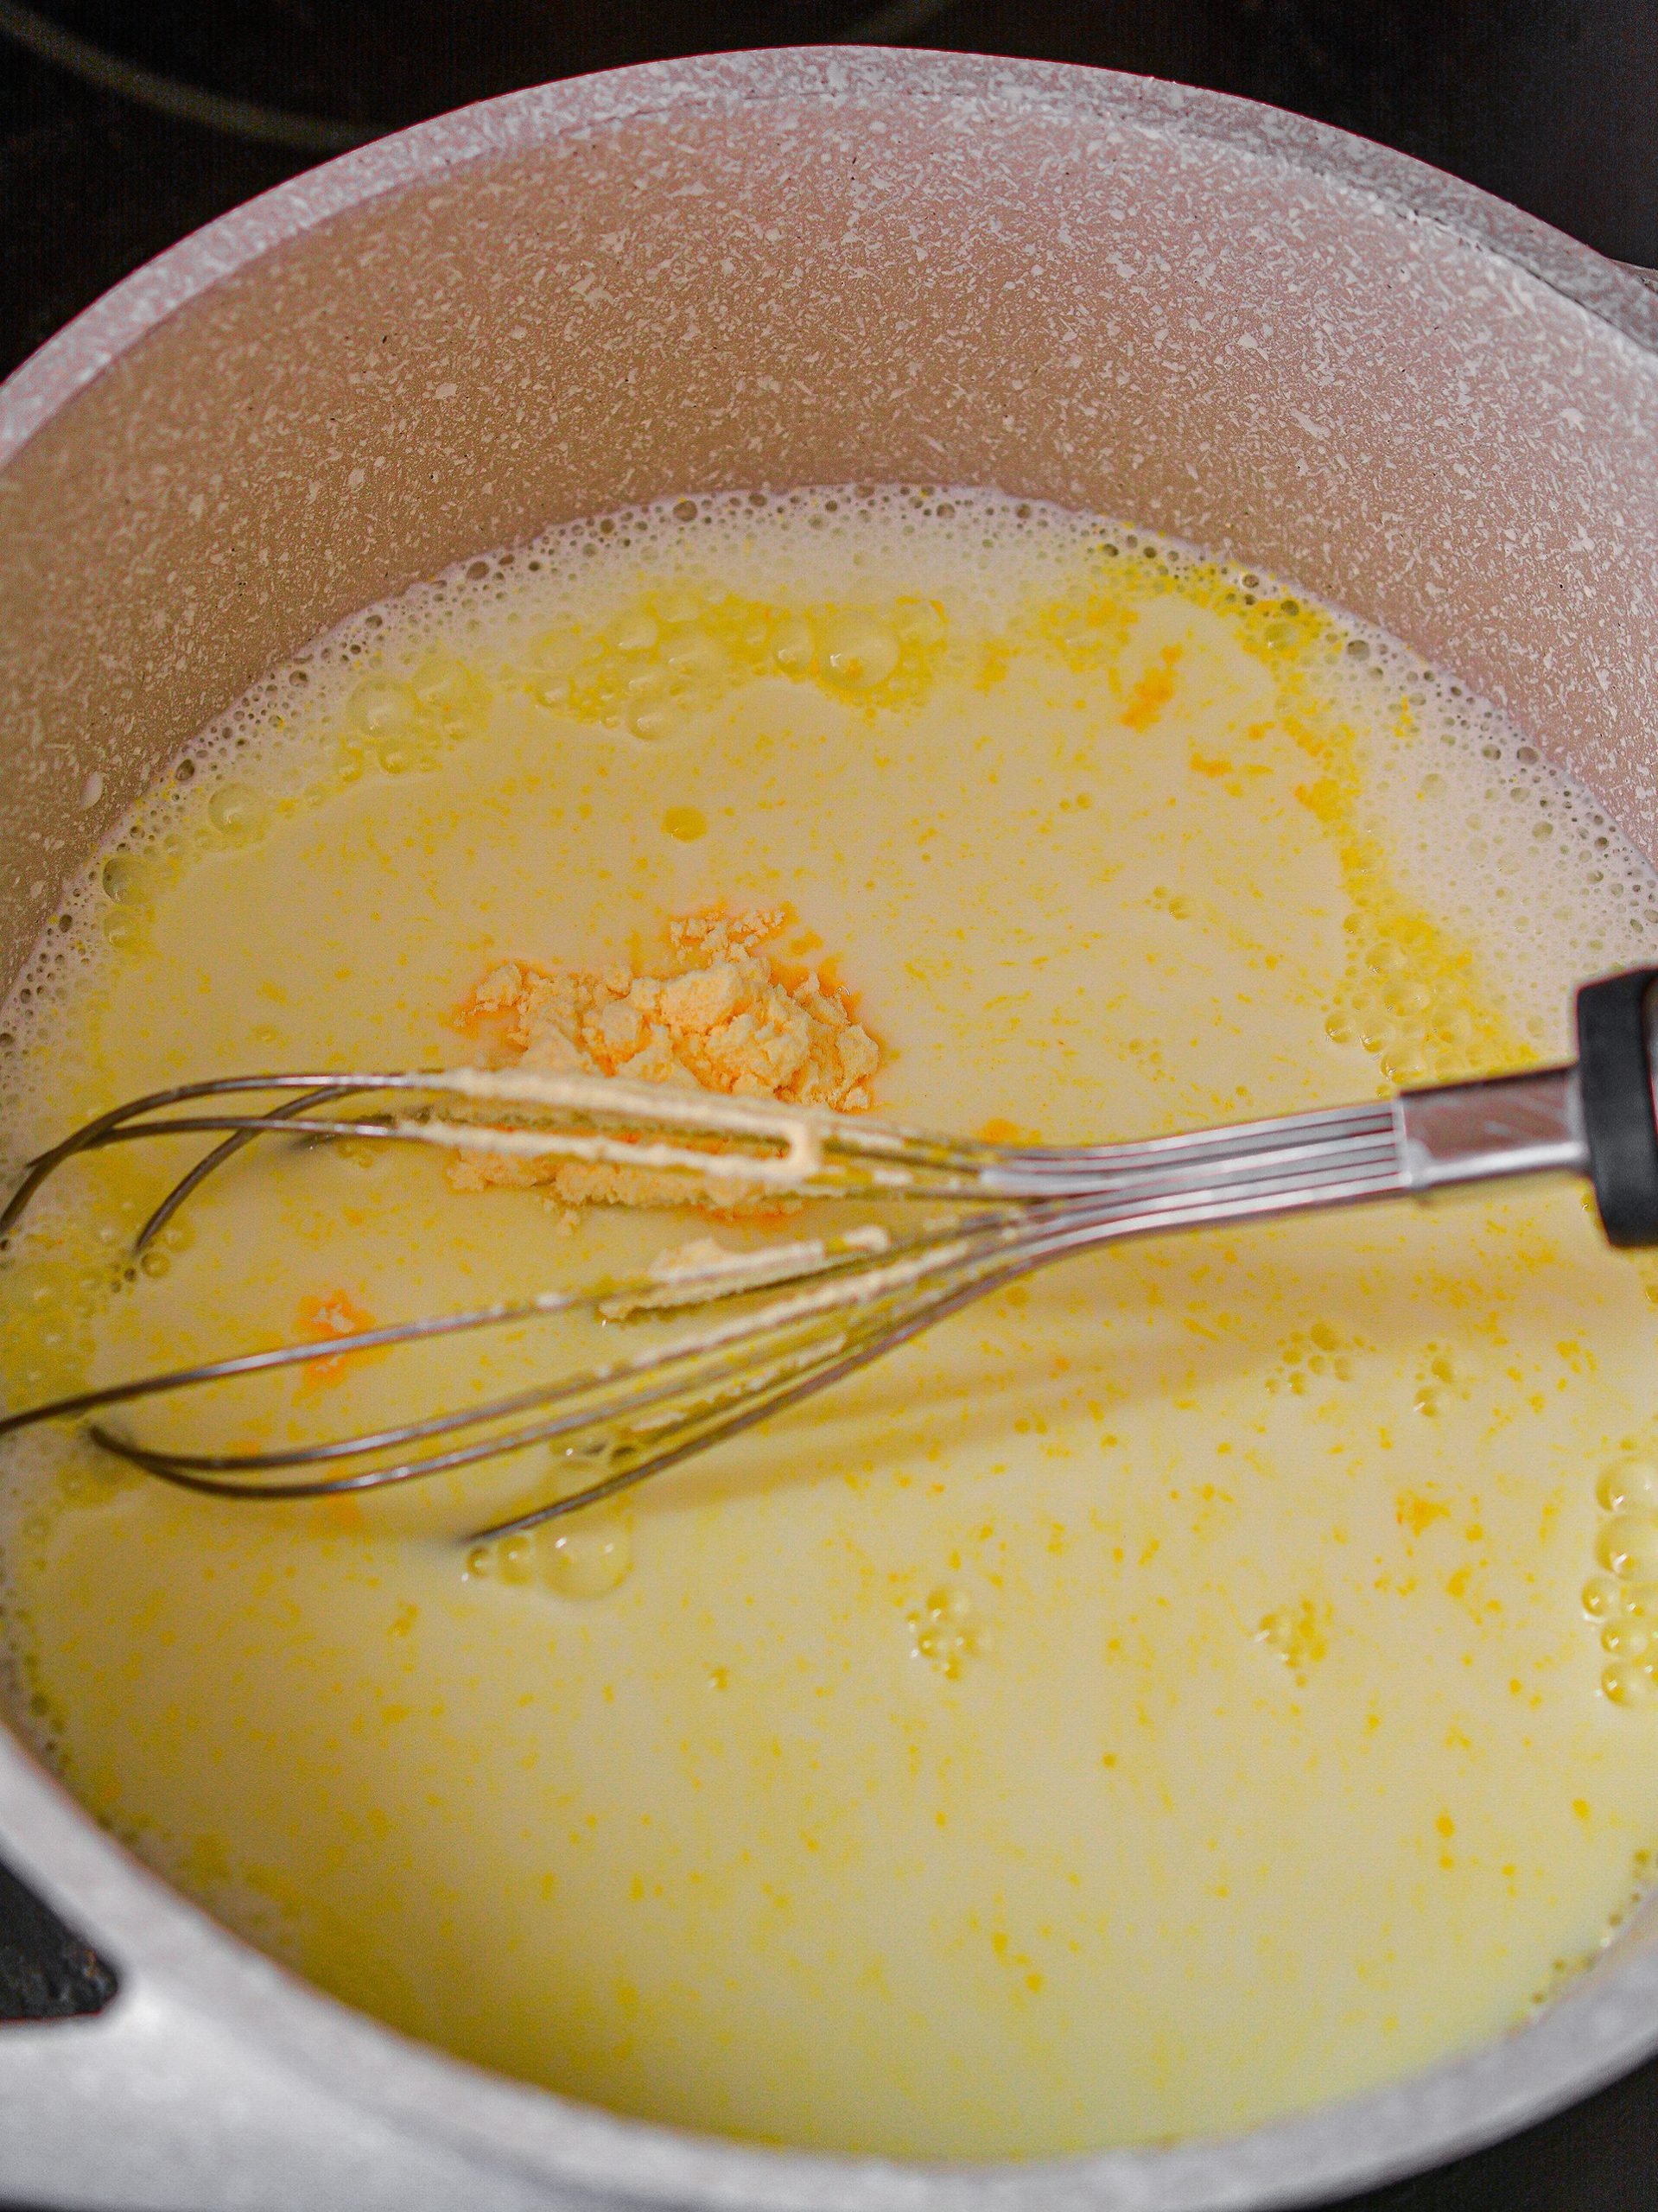 Continue to stir the mixture often while it thickens and comes to a light boil.